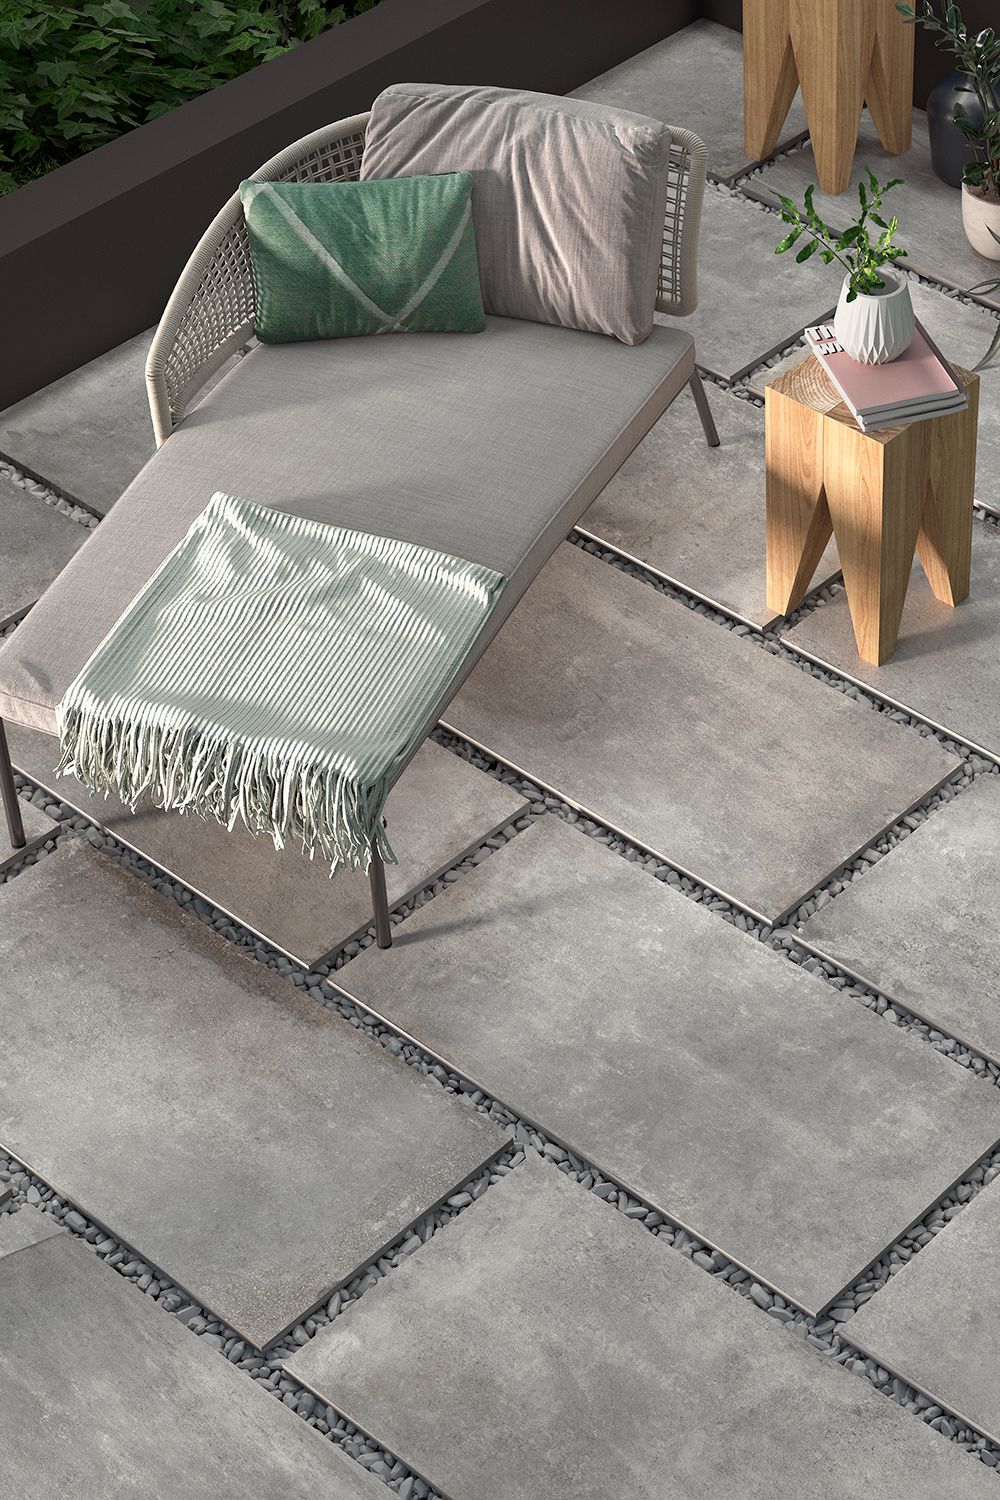 Outdoor flooring enables you to step out in style